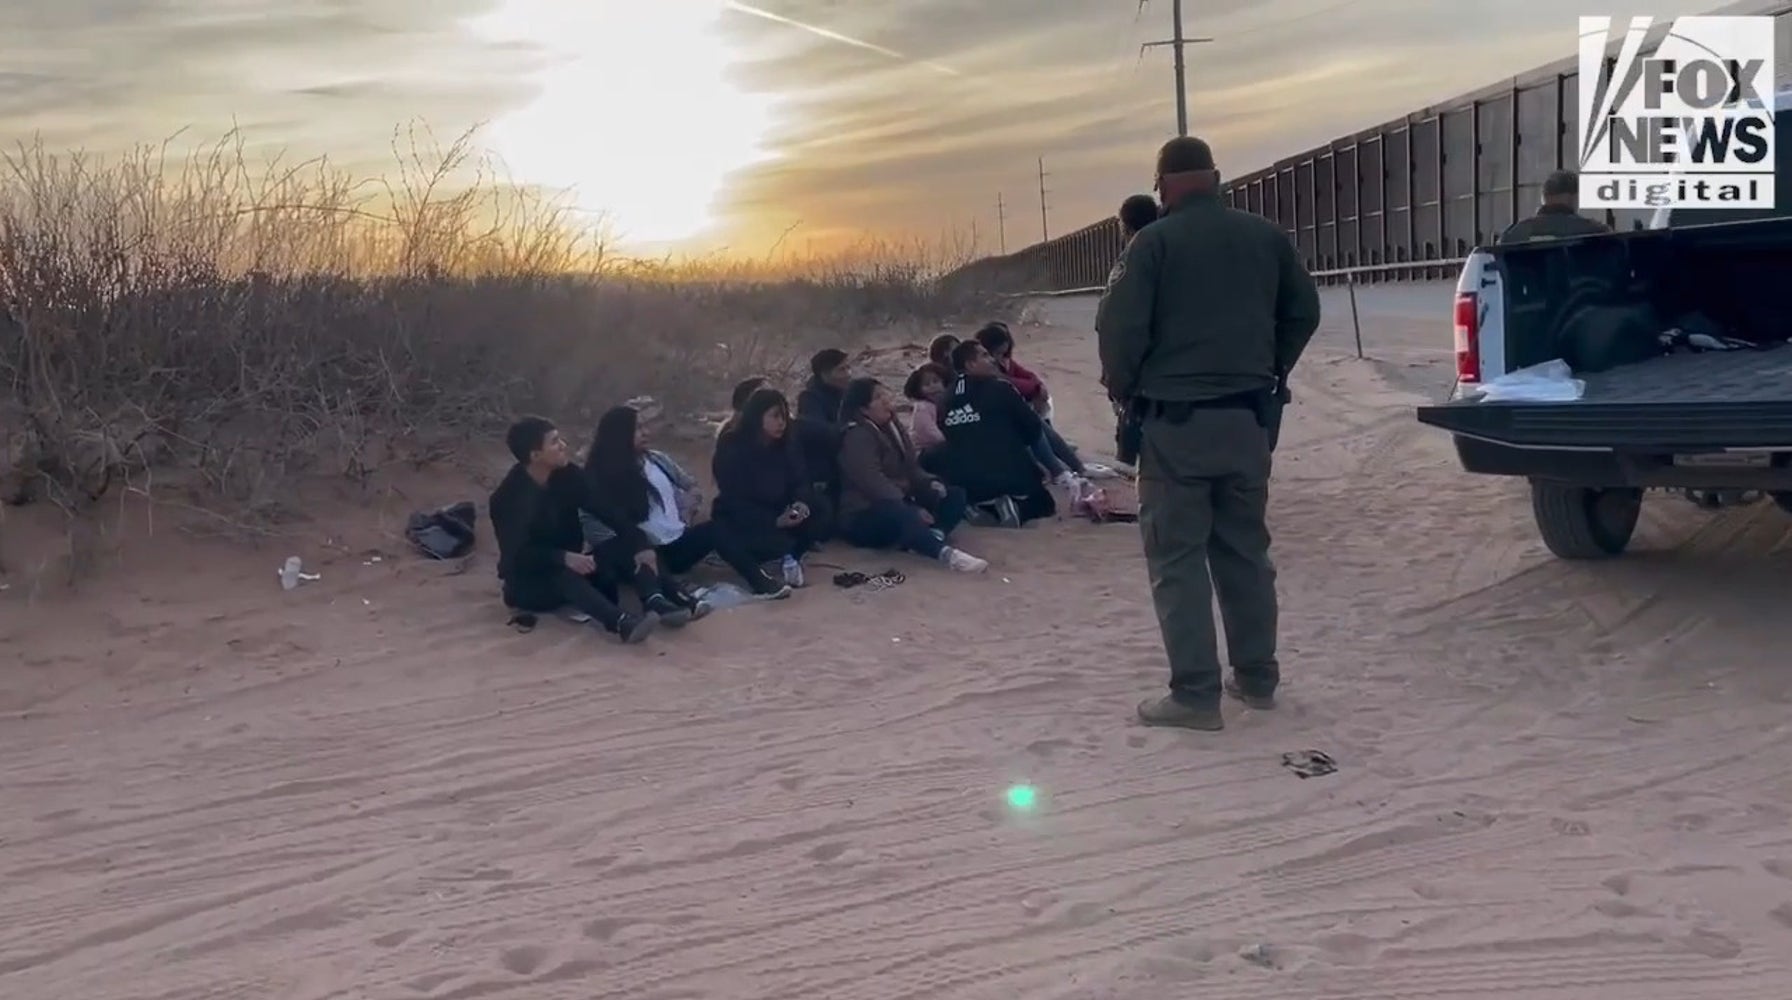 Border Patrol's Multi-Layered Enforcement System Thwarts Illegal Immigration in El Paso Sector